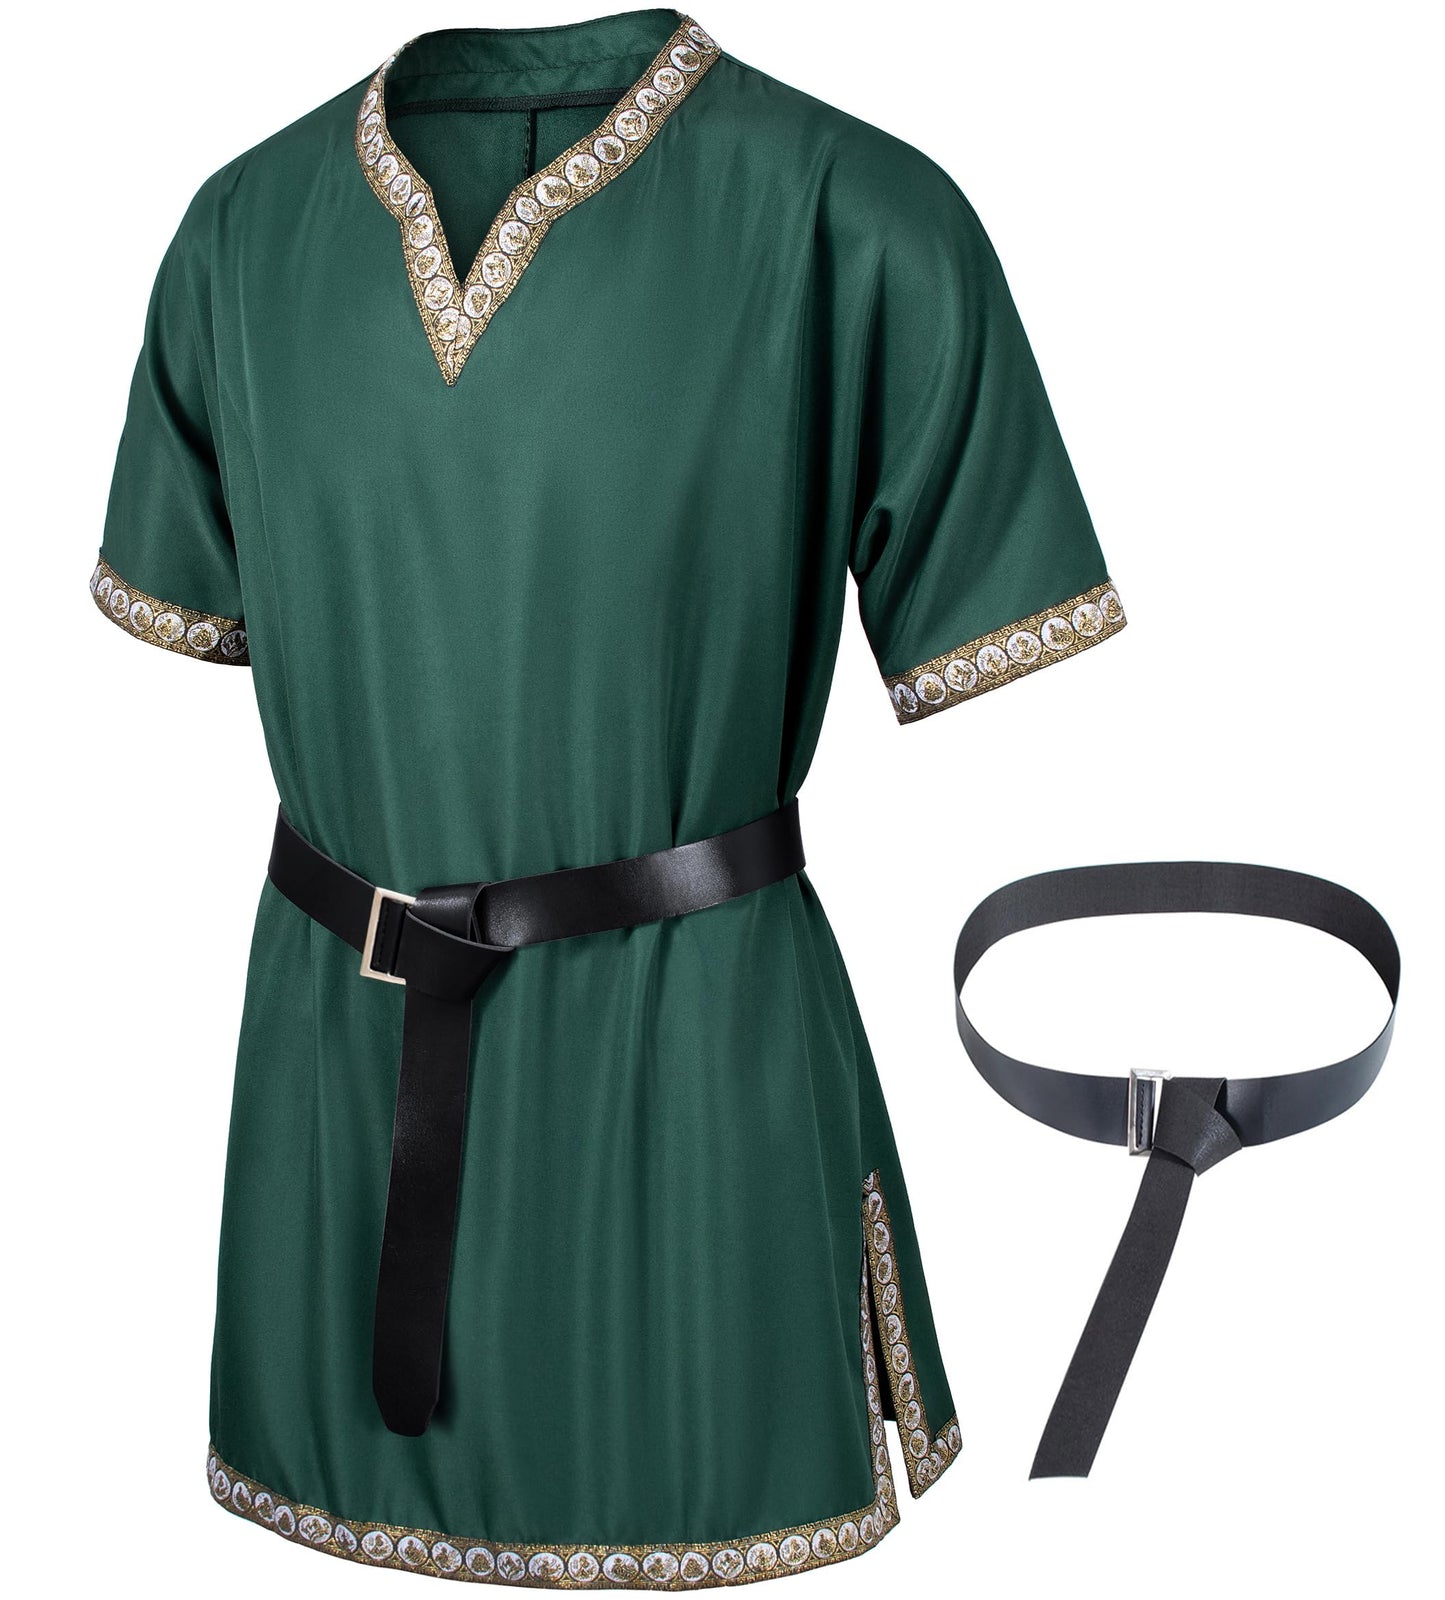 TOGROP Mens Medieval Costume Viking Tunic Knight Warrior Renaissance Shirts with Belt X-Large Green